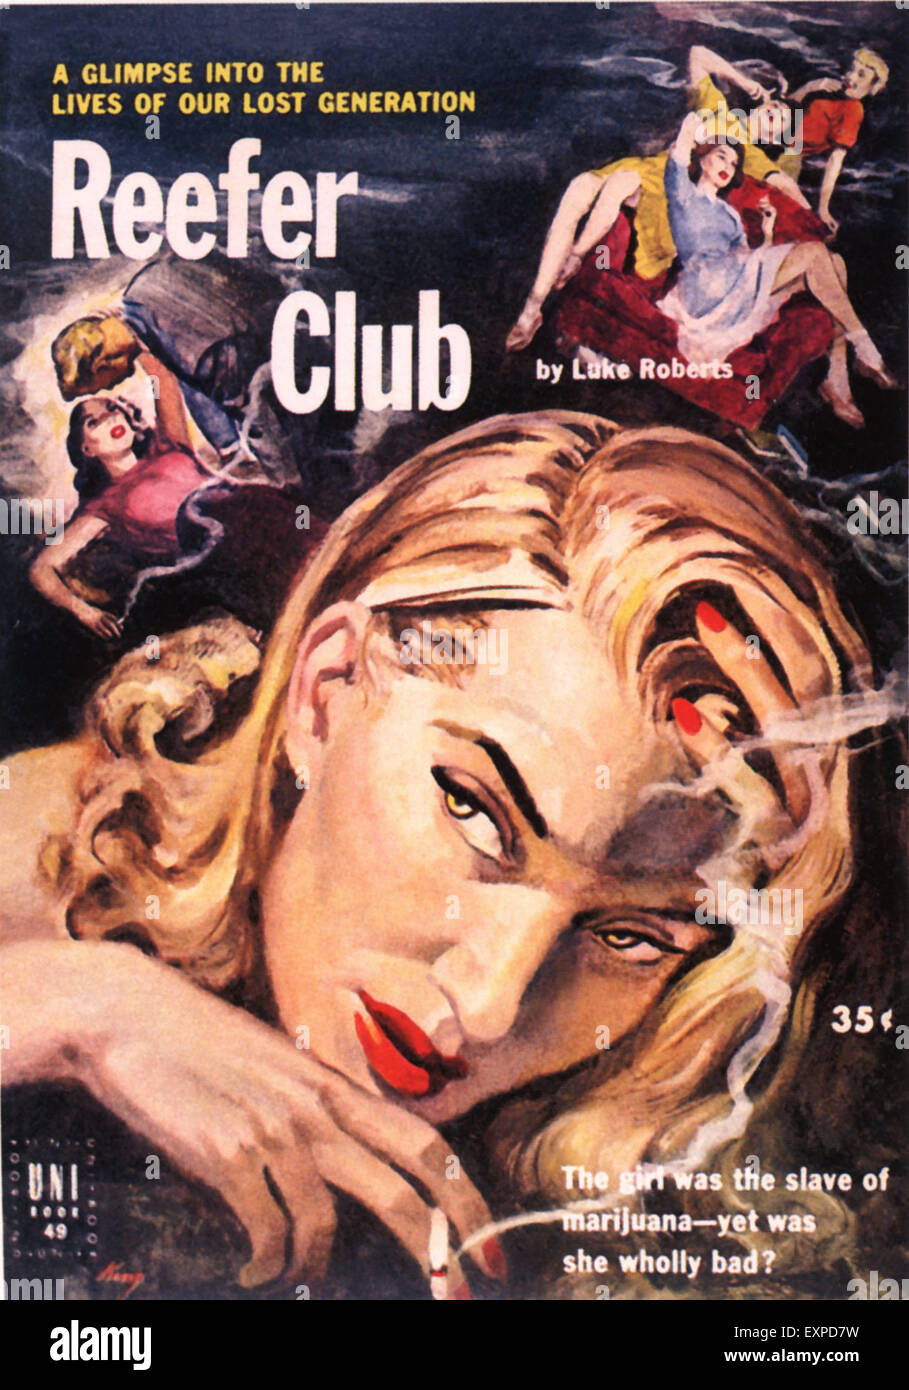 1950s USA Reefer Club Book Cover Stock Photo